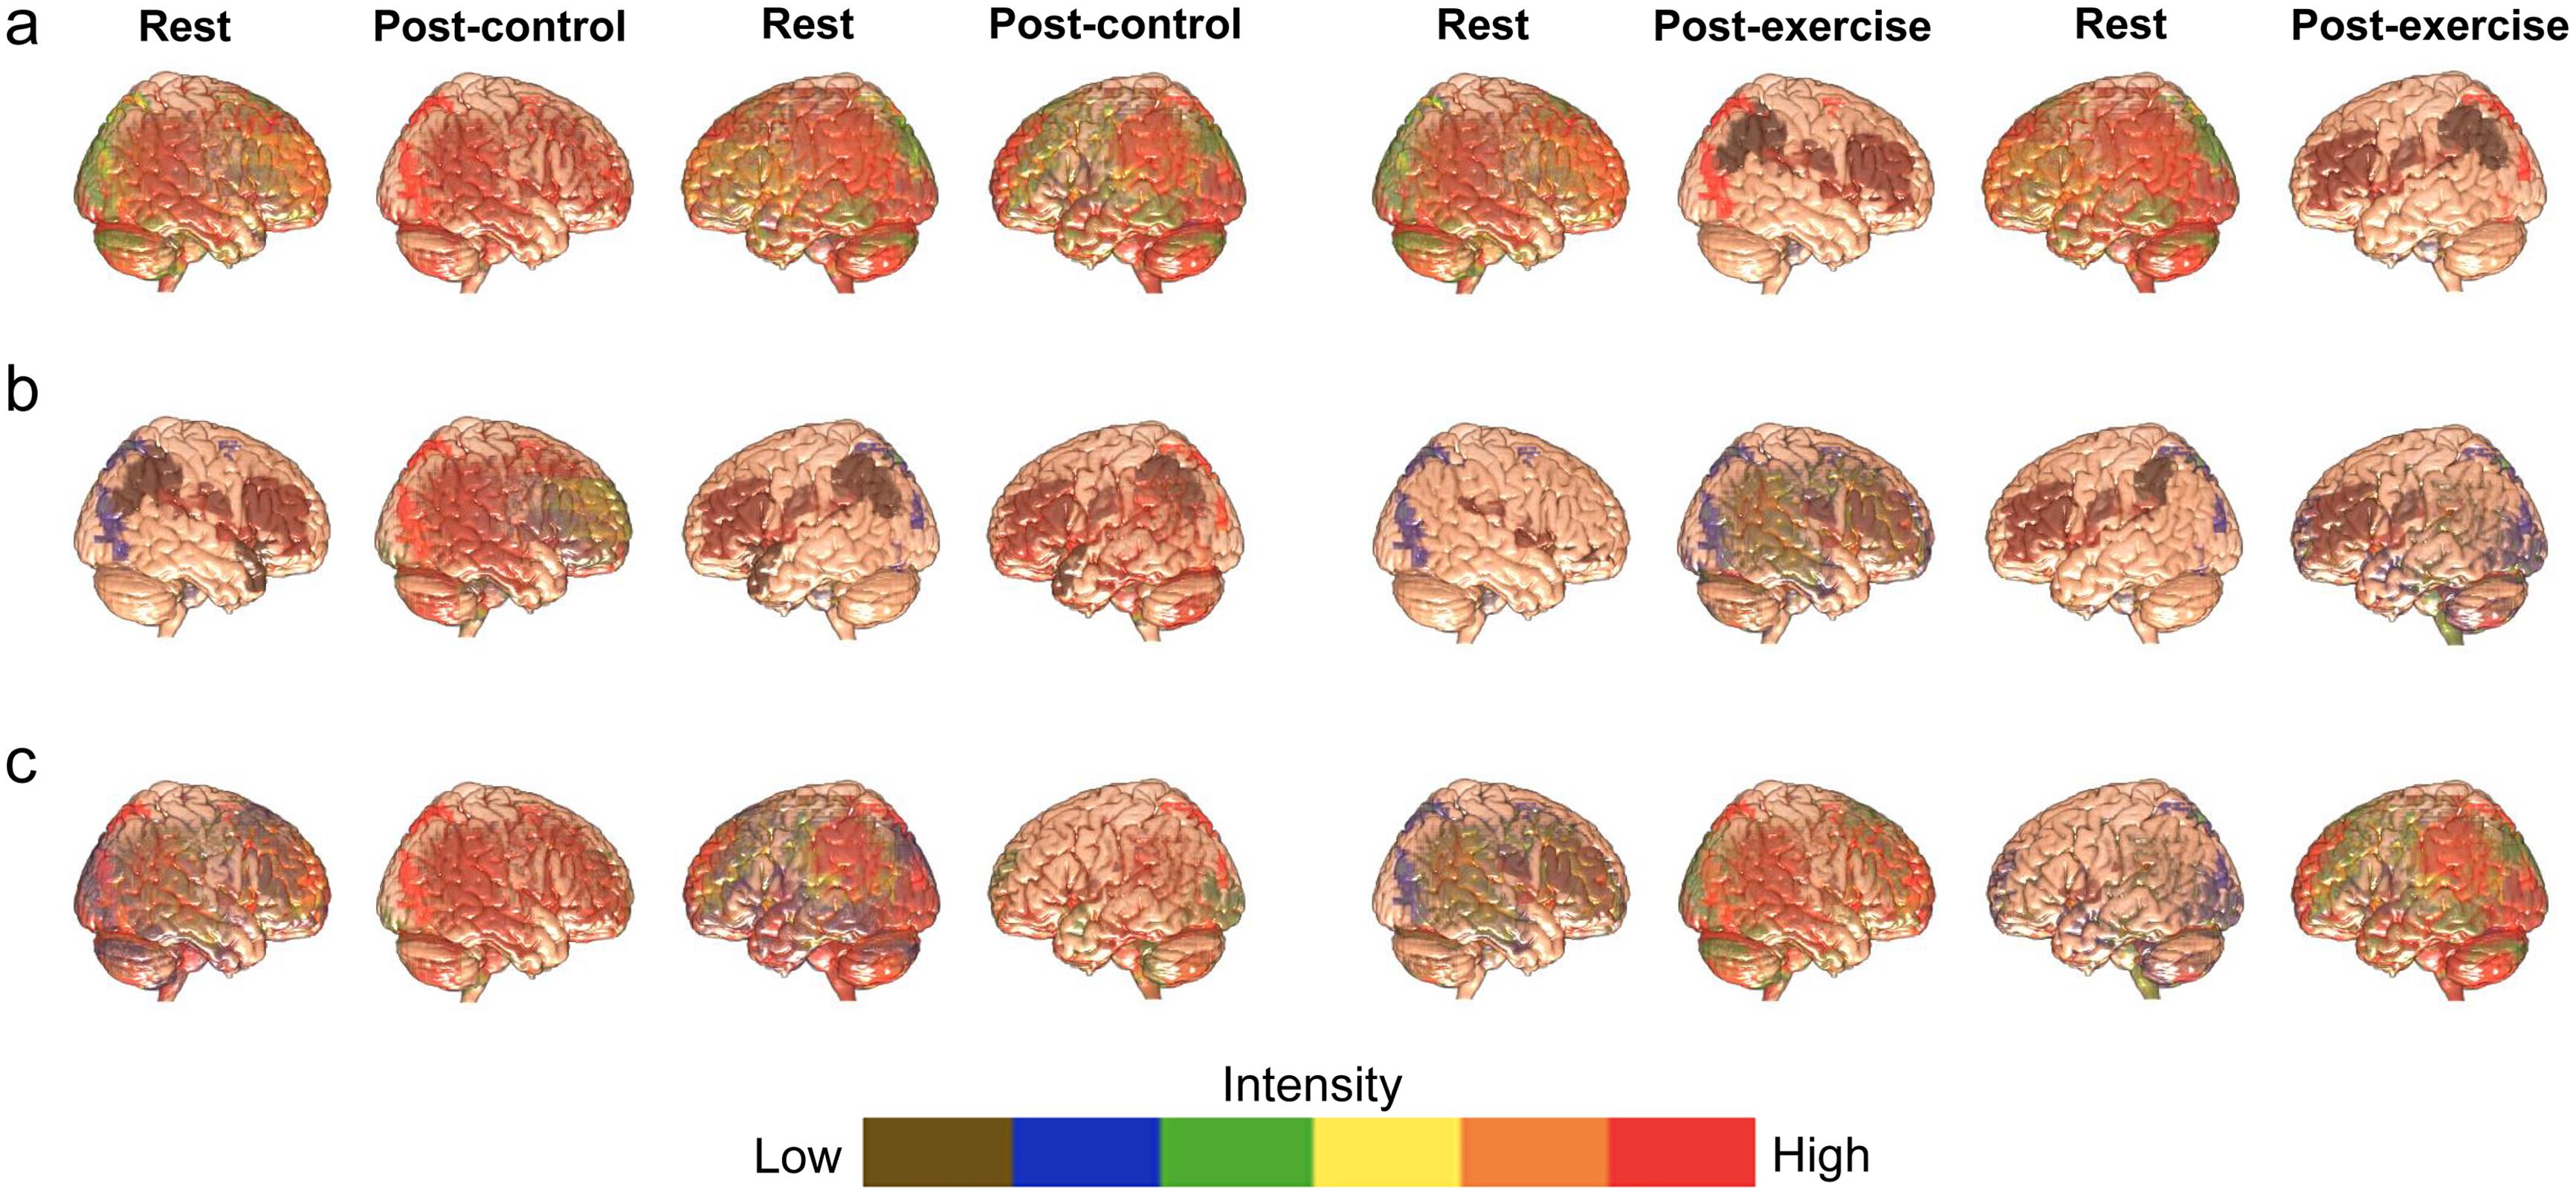 Neuroimages depicting right- and left-brain hemispheres of each patient during rest, control, and exercise conditions.